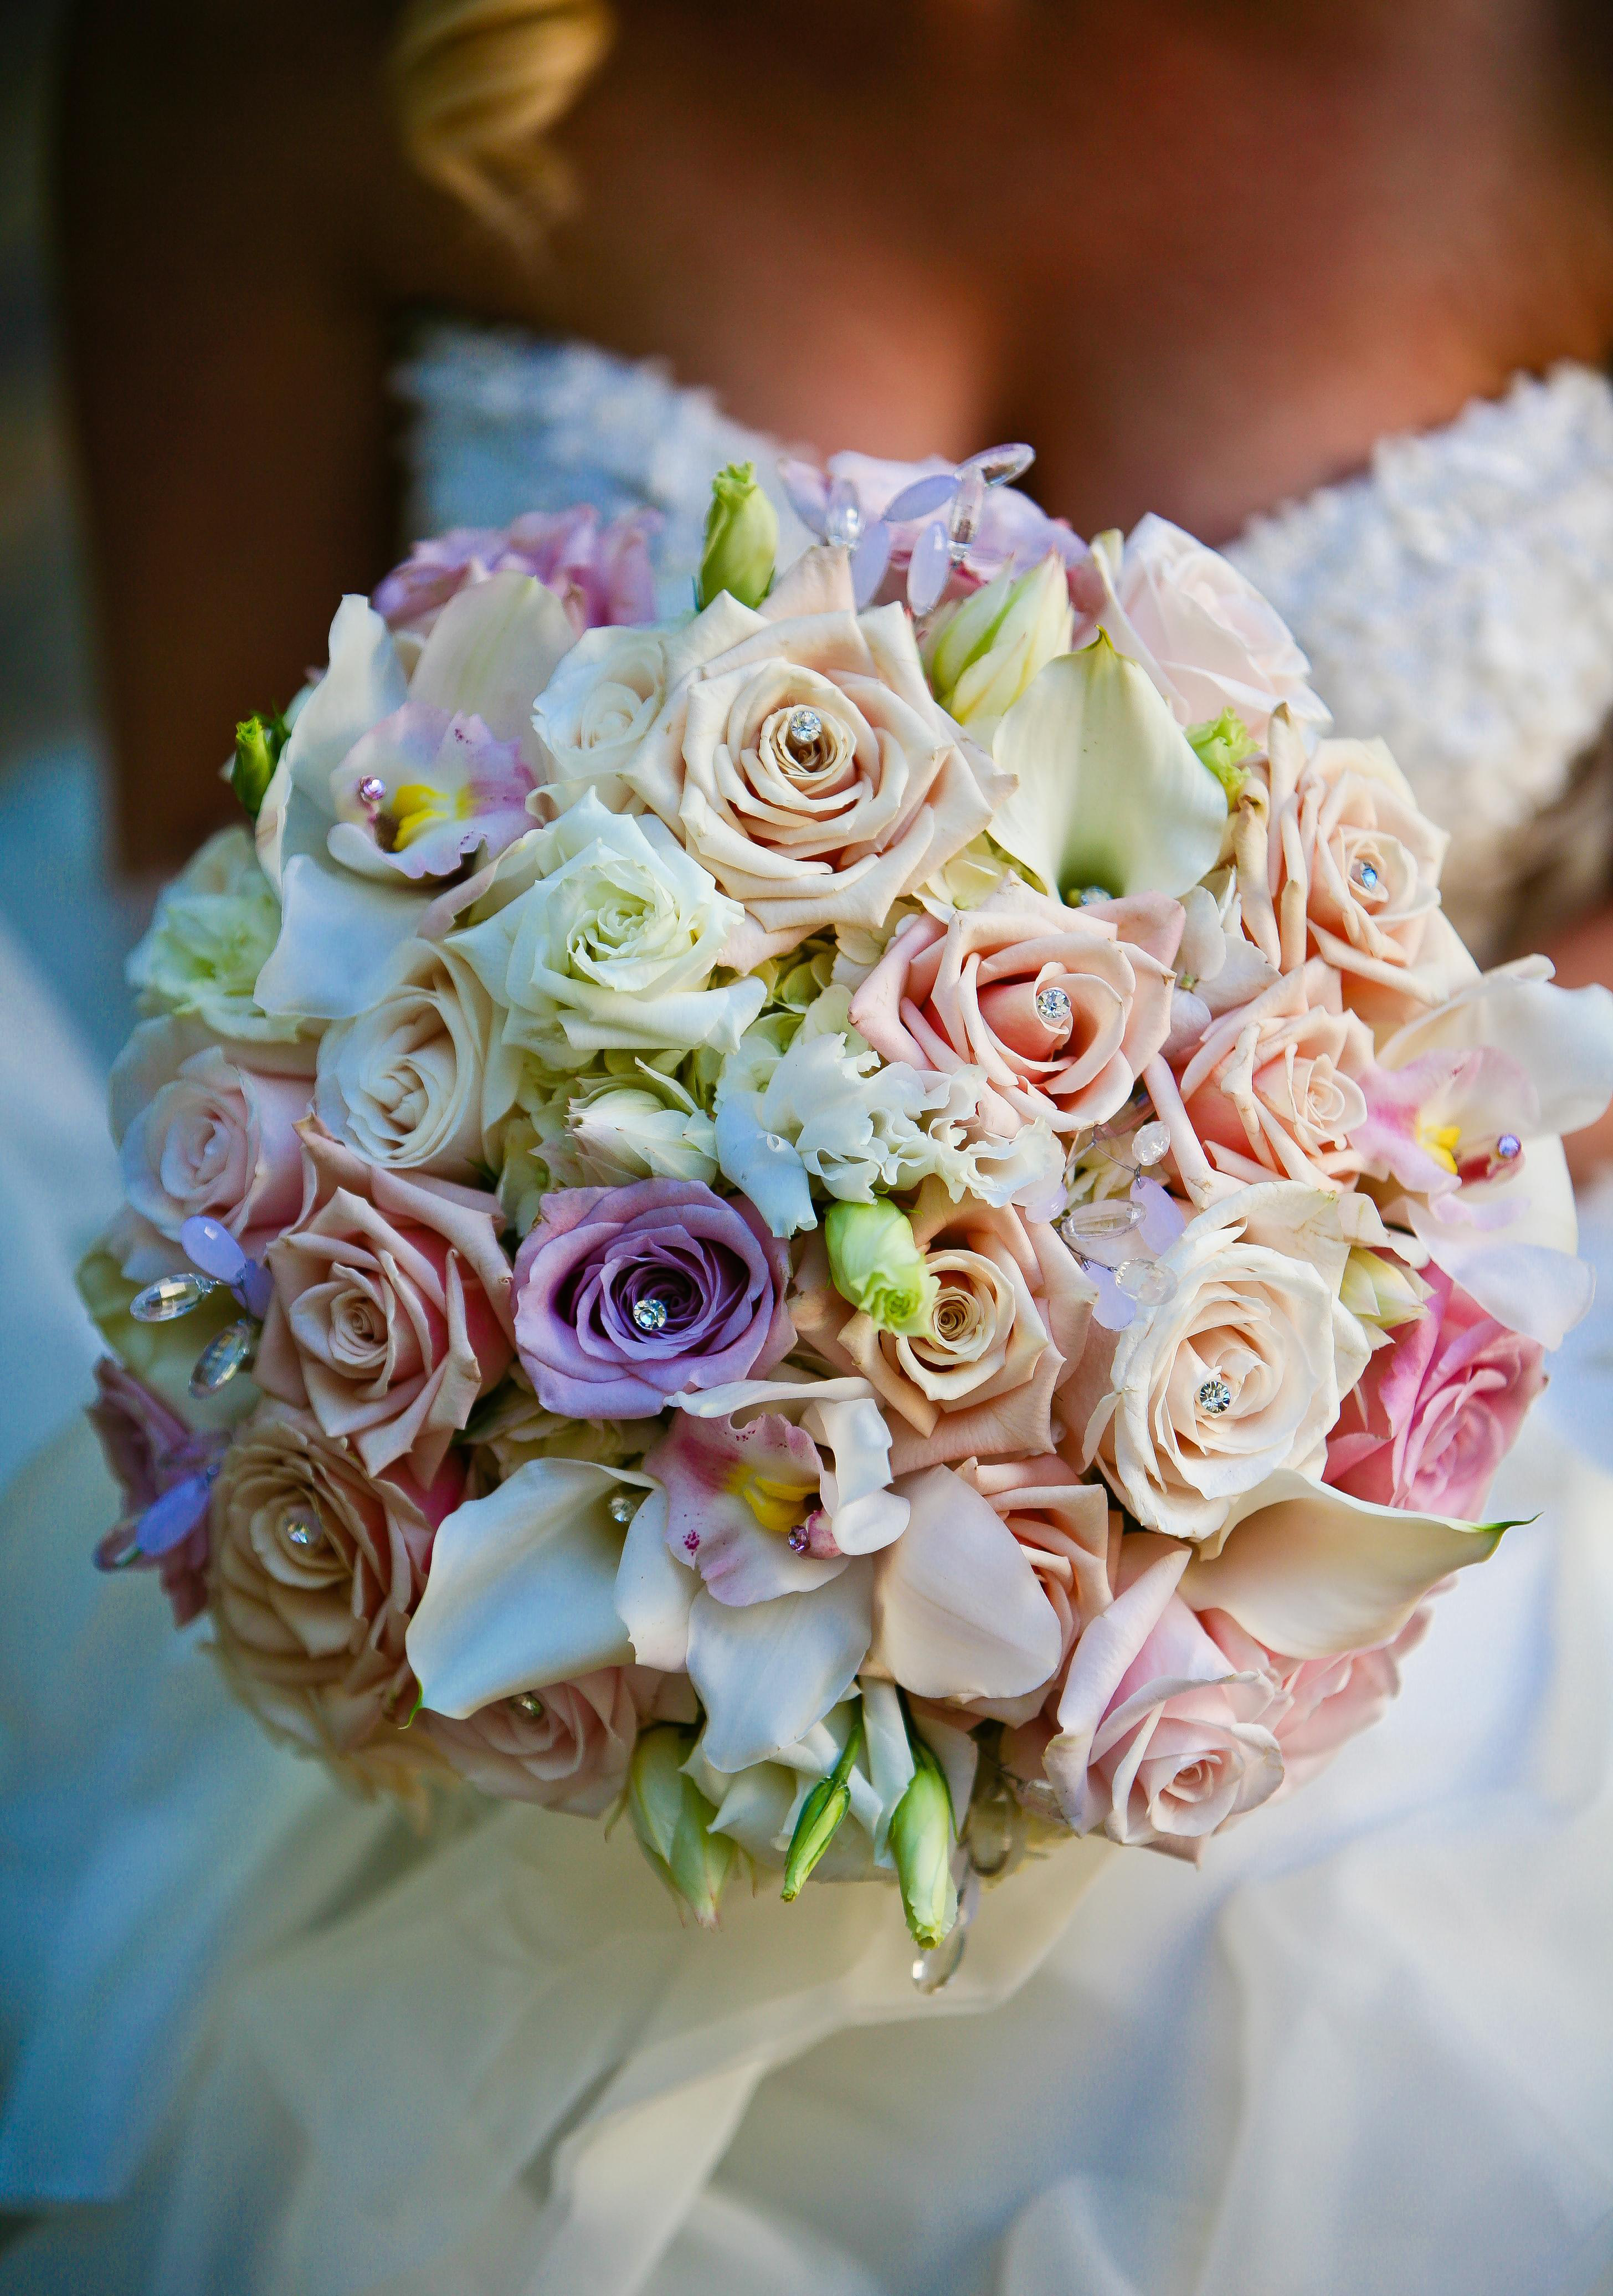 Flowers by Cina Bridal Bouquets - Flowers by Cina